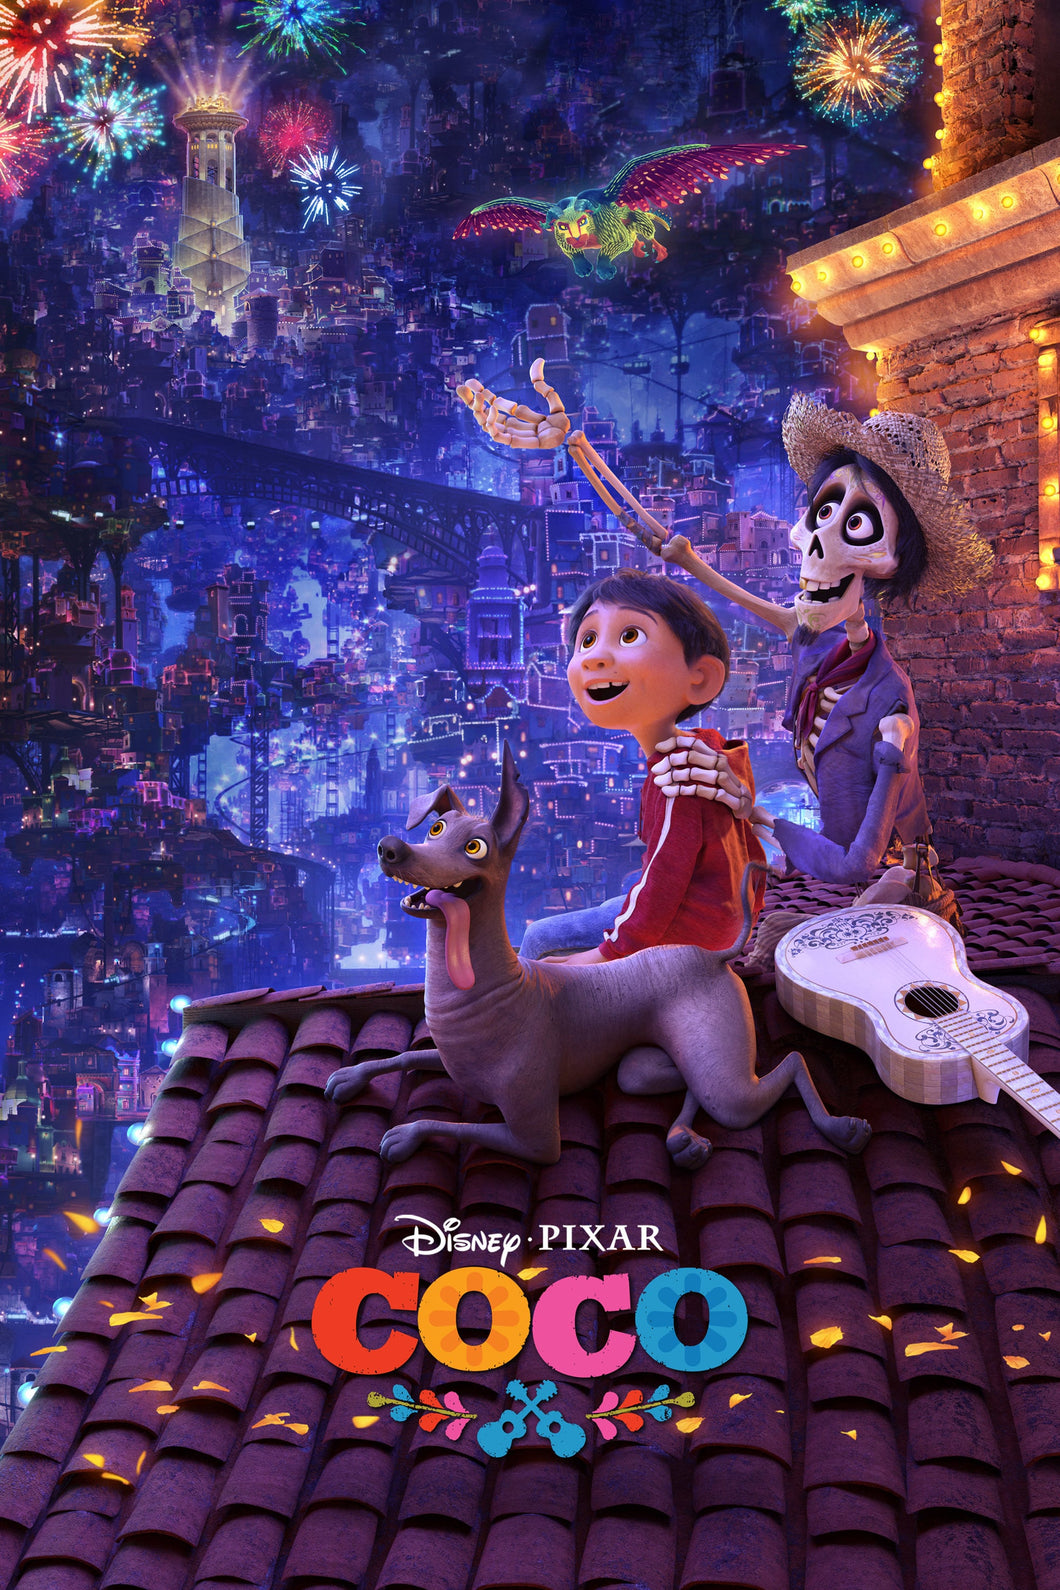 Coco (2017) V2 Animated Movie Poster Framed or Unframed Glossy Poster Free UK Shipping!!!